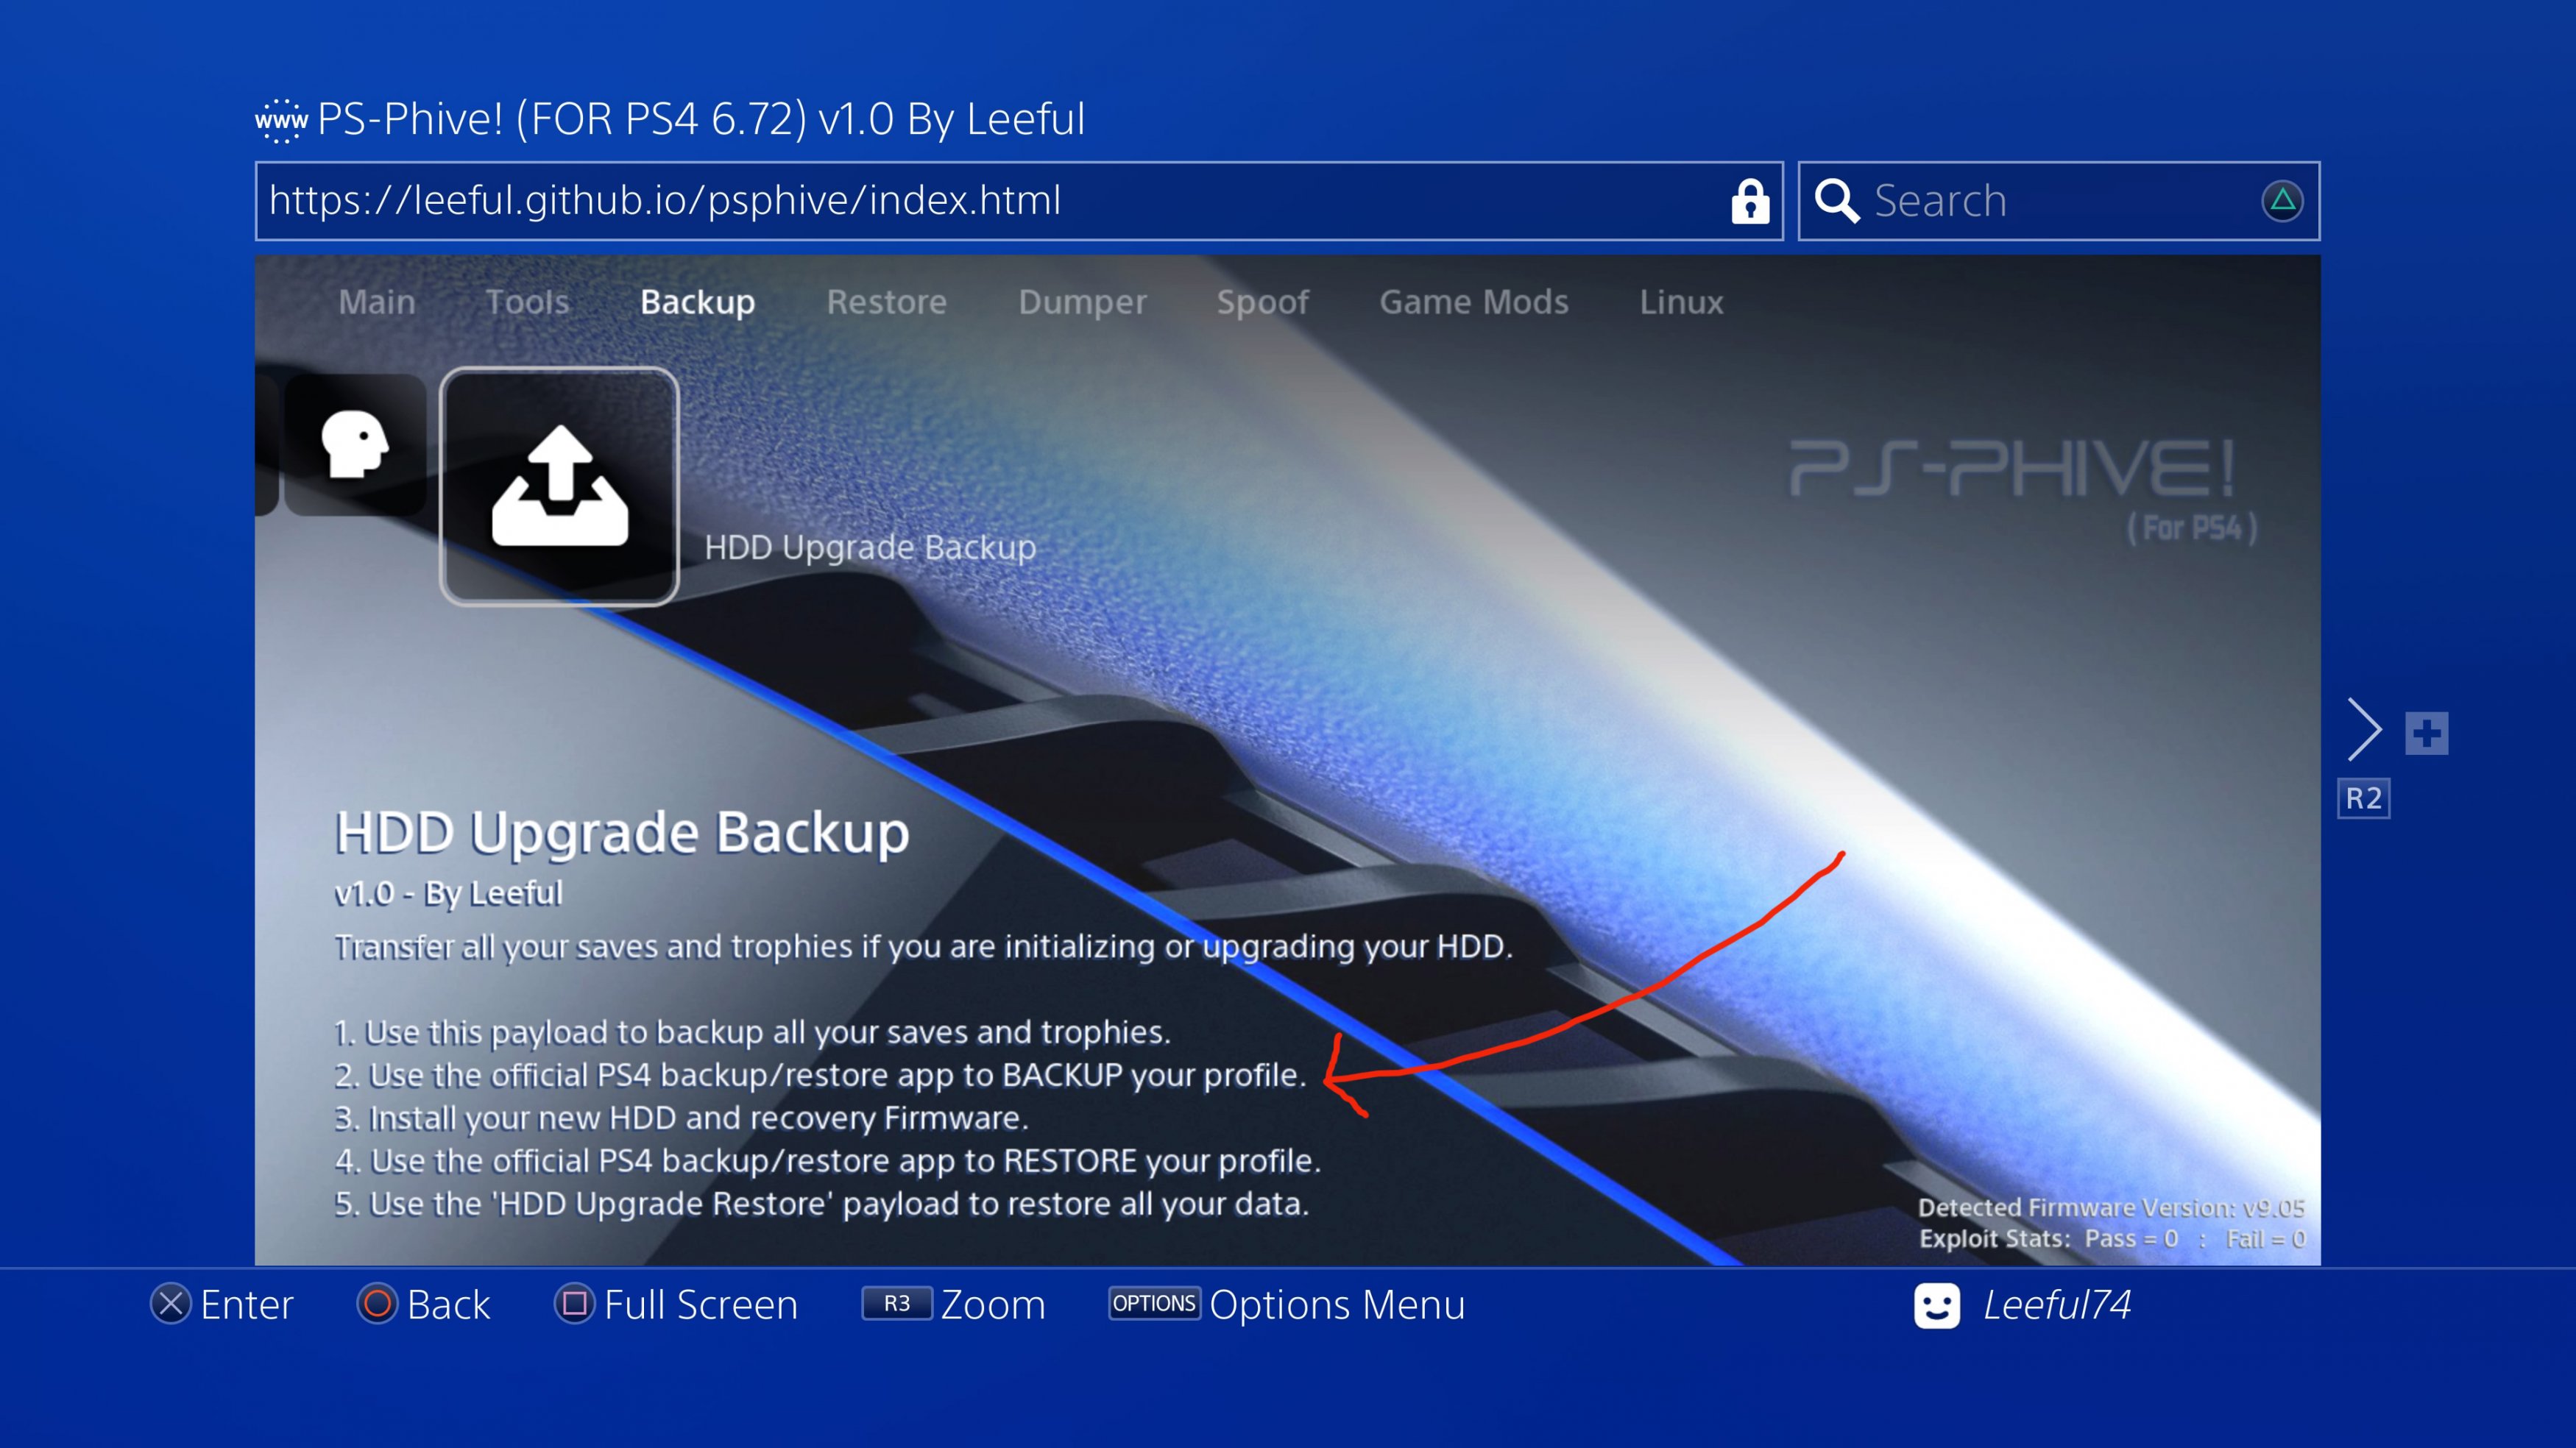 Release] PS-Phive! (ForPS4 6.72) Exploit Host Menu | Page 3 | GBAtemp.net -  The Independent Video Game Community